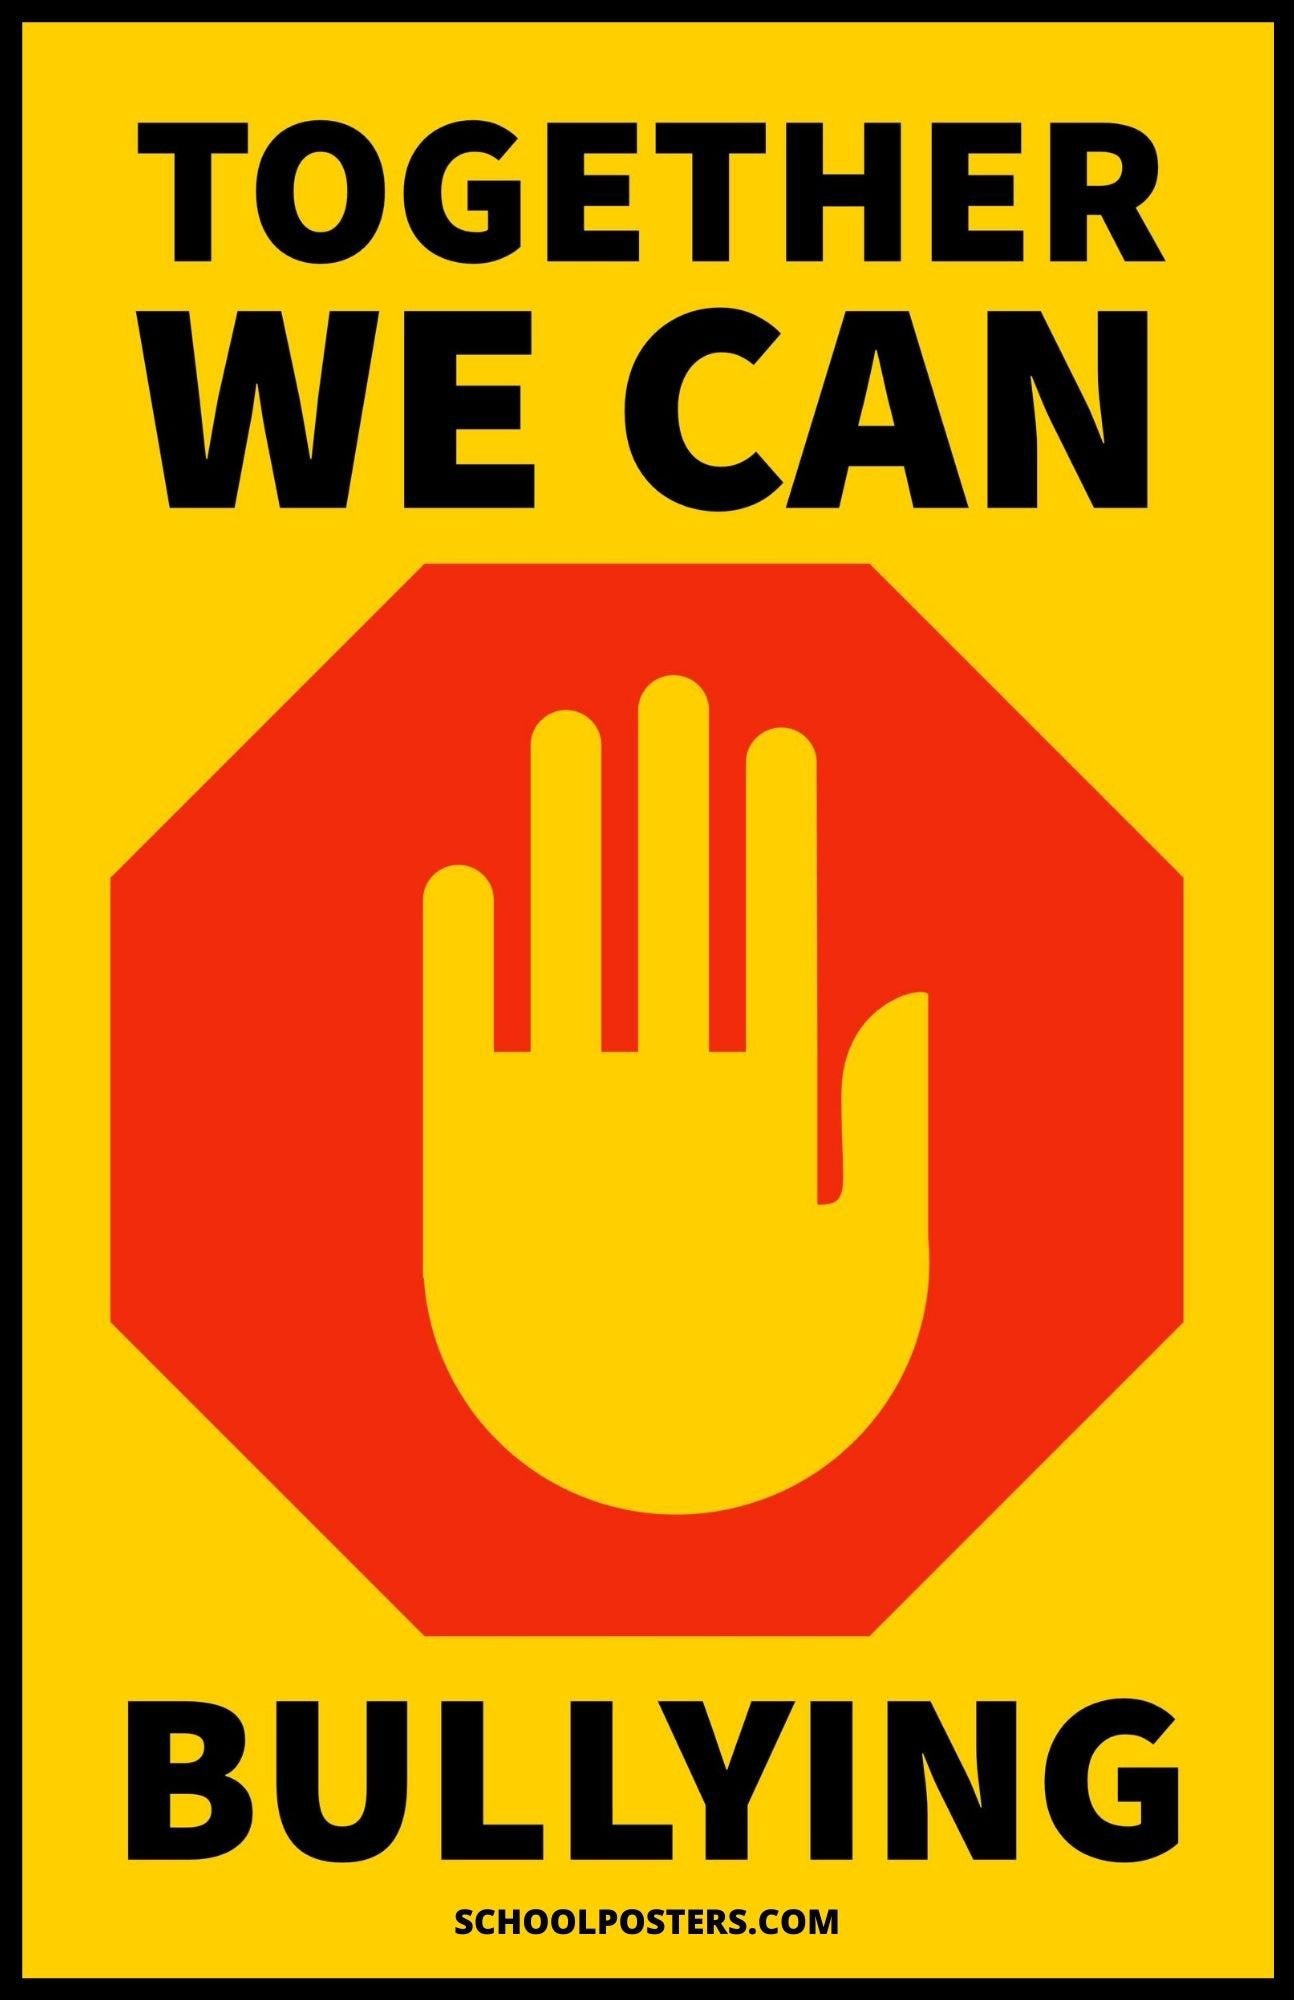 Together We Can Stop Bullying Poster – SchoolPosters.com LLC